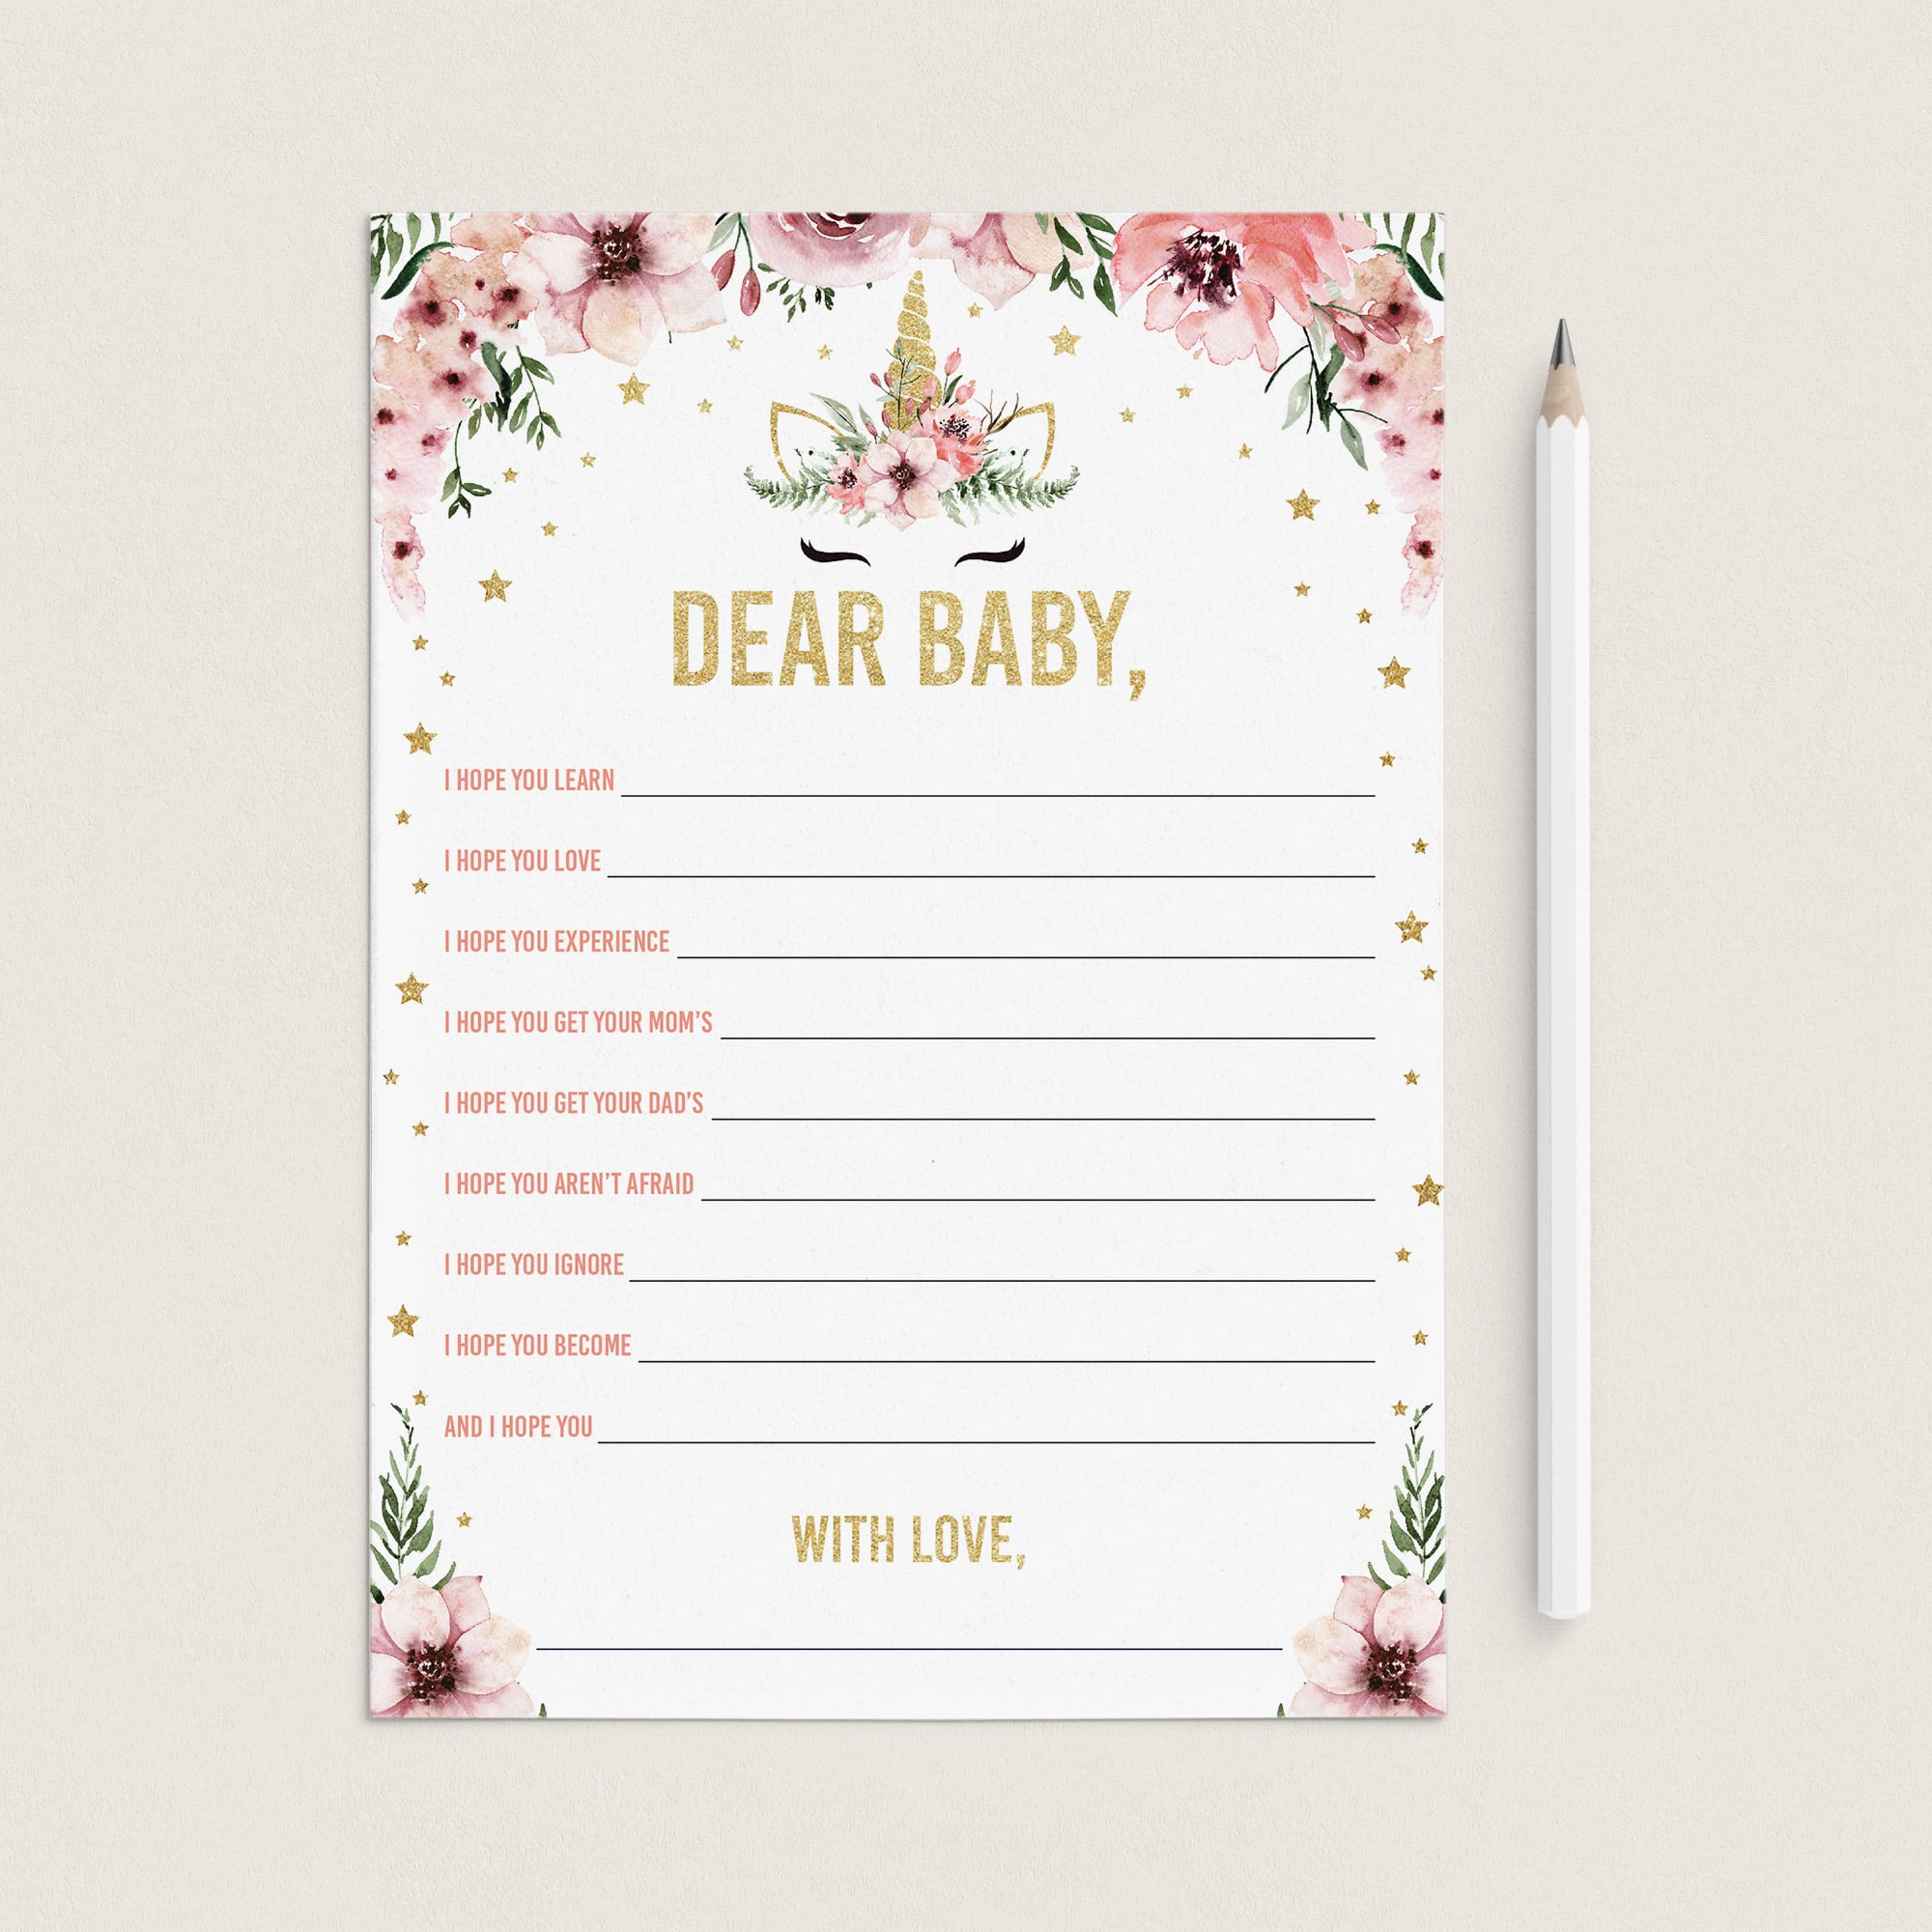 Printable dear baby cards with watercolor unicorn by LittleSizzle